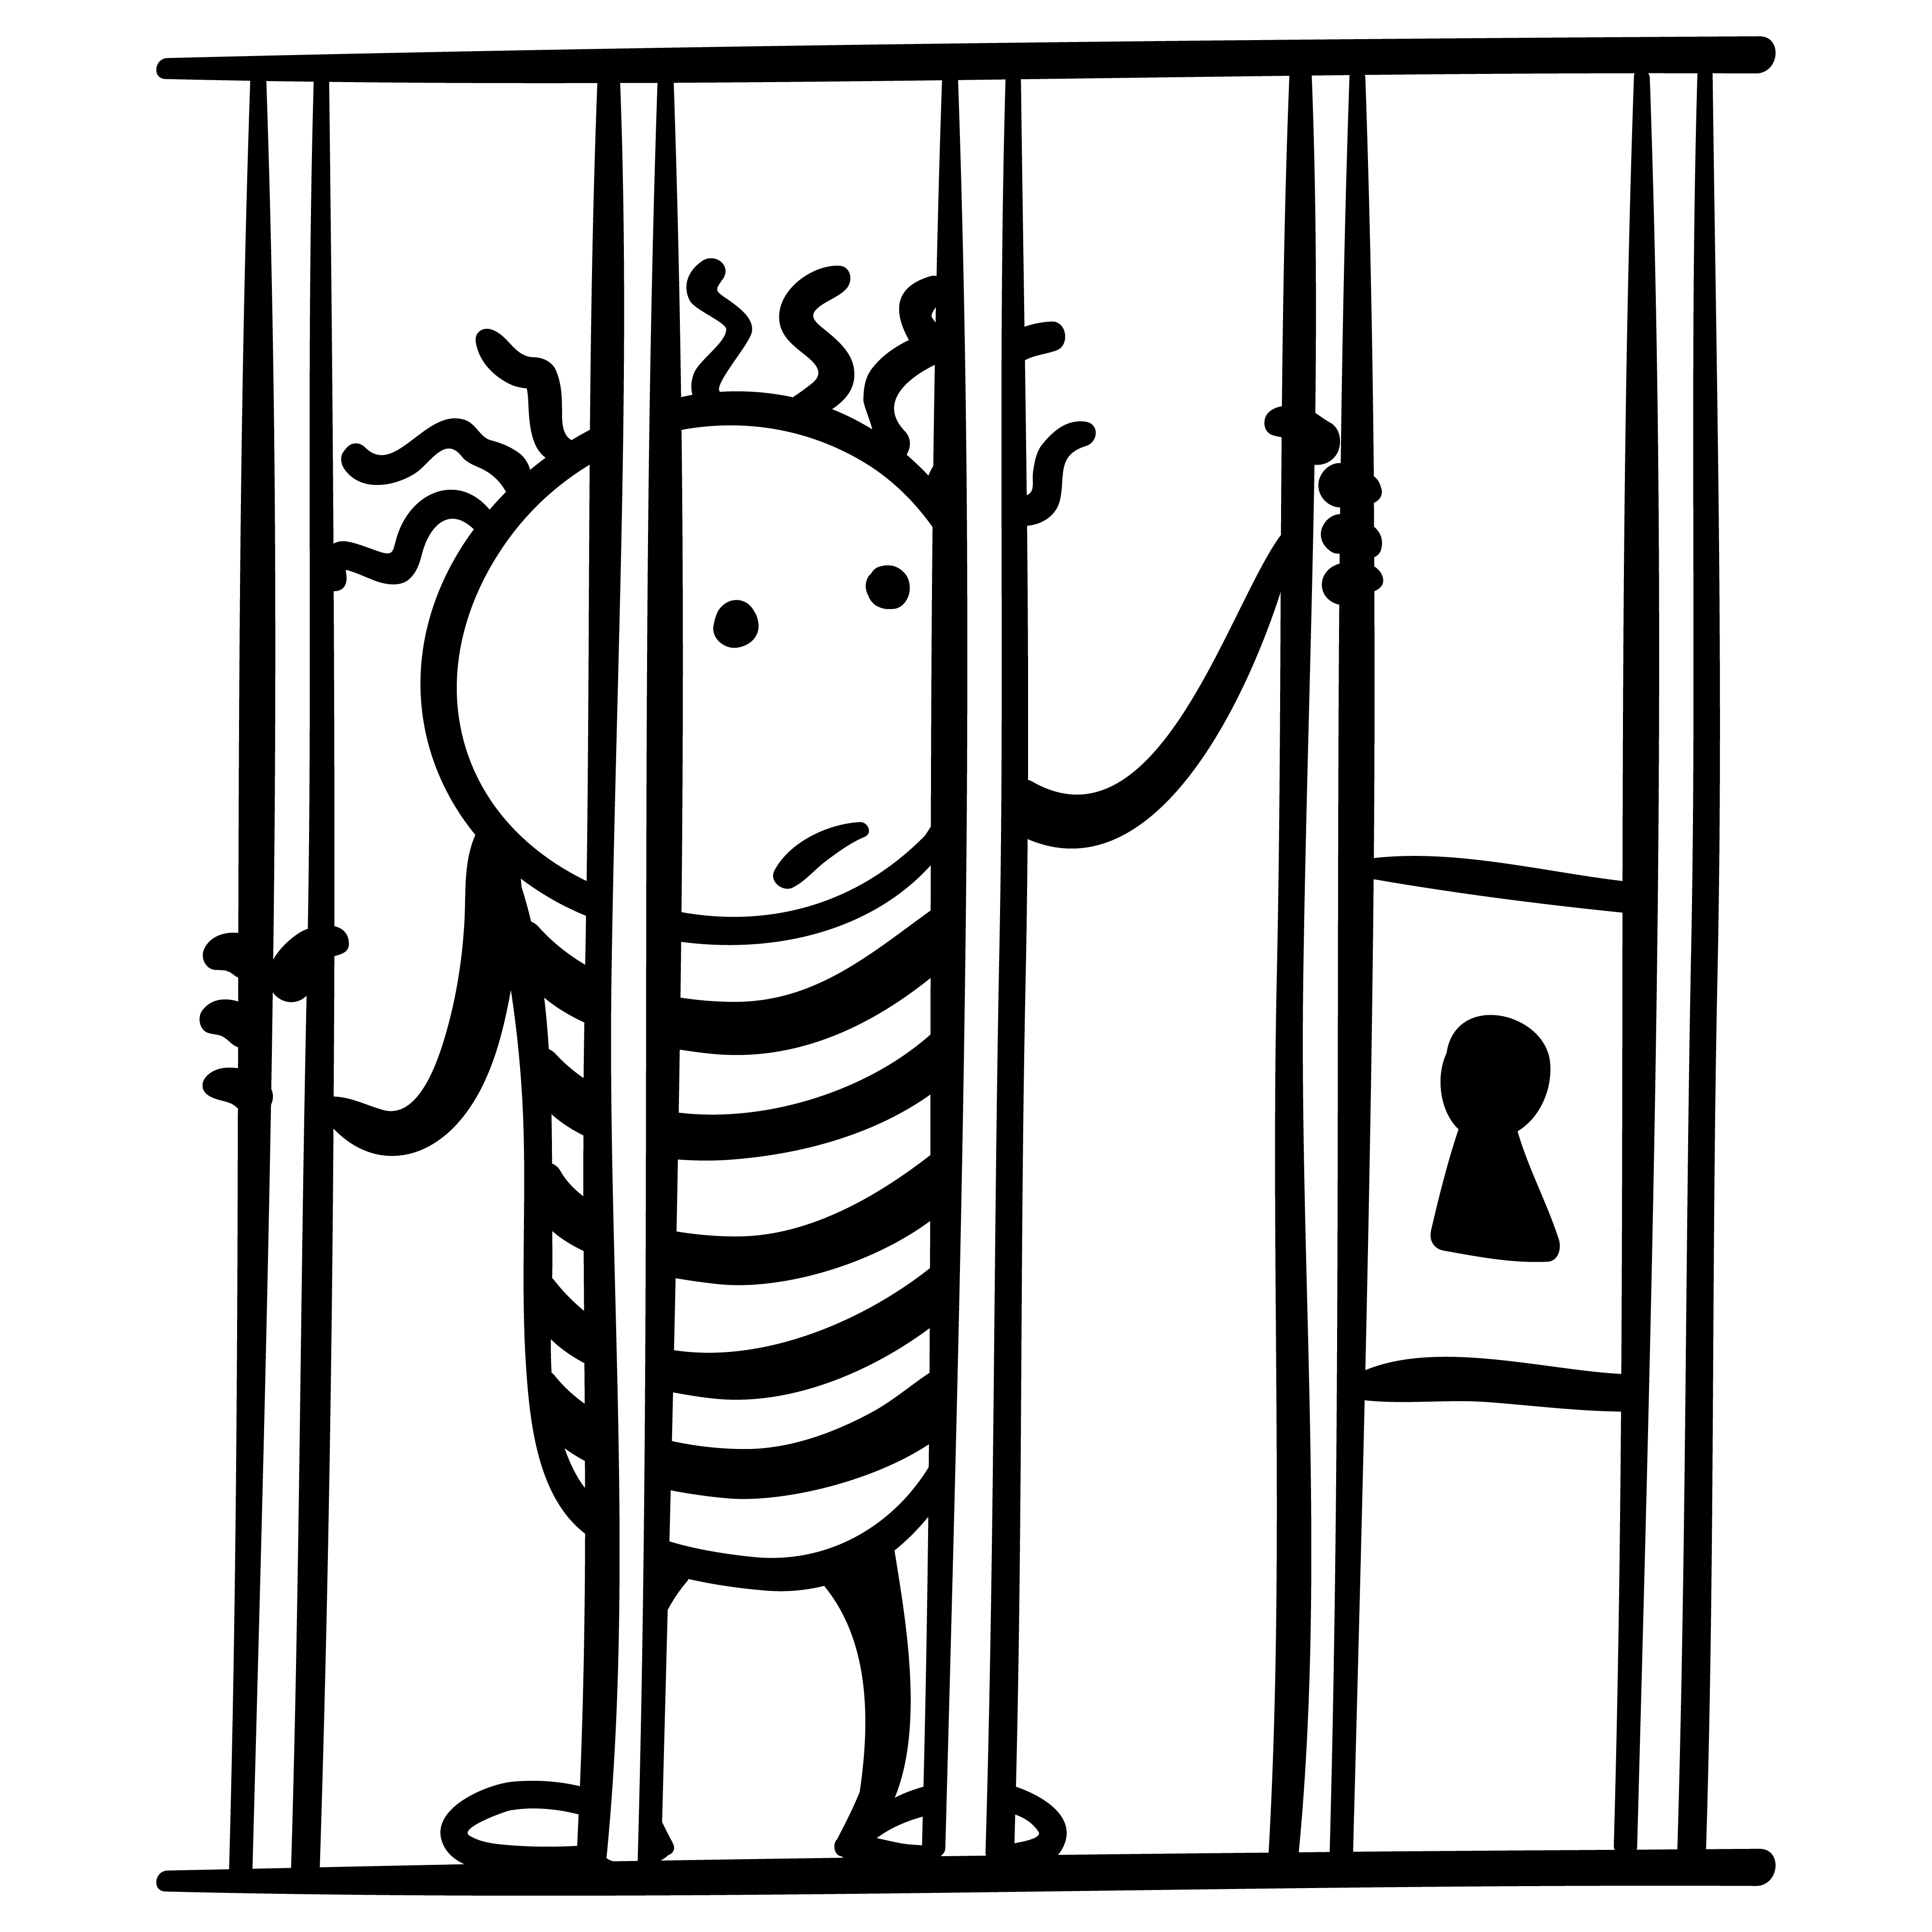 Illustration of jail clipart free | ClipartMonk - Free Clip Art Images